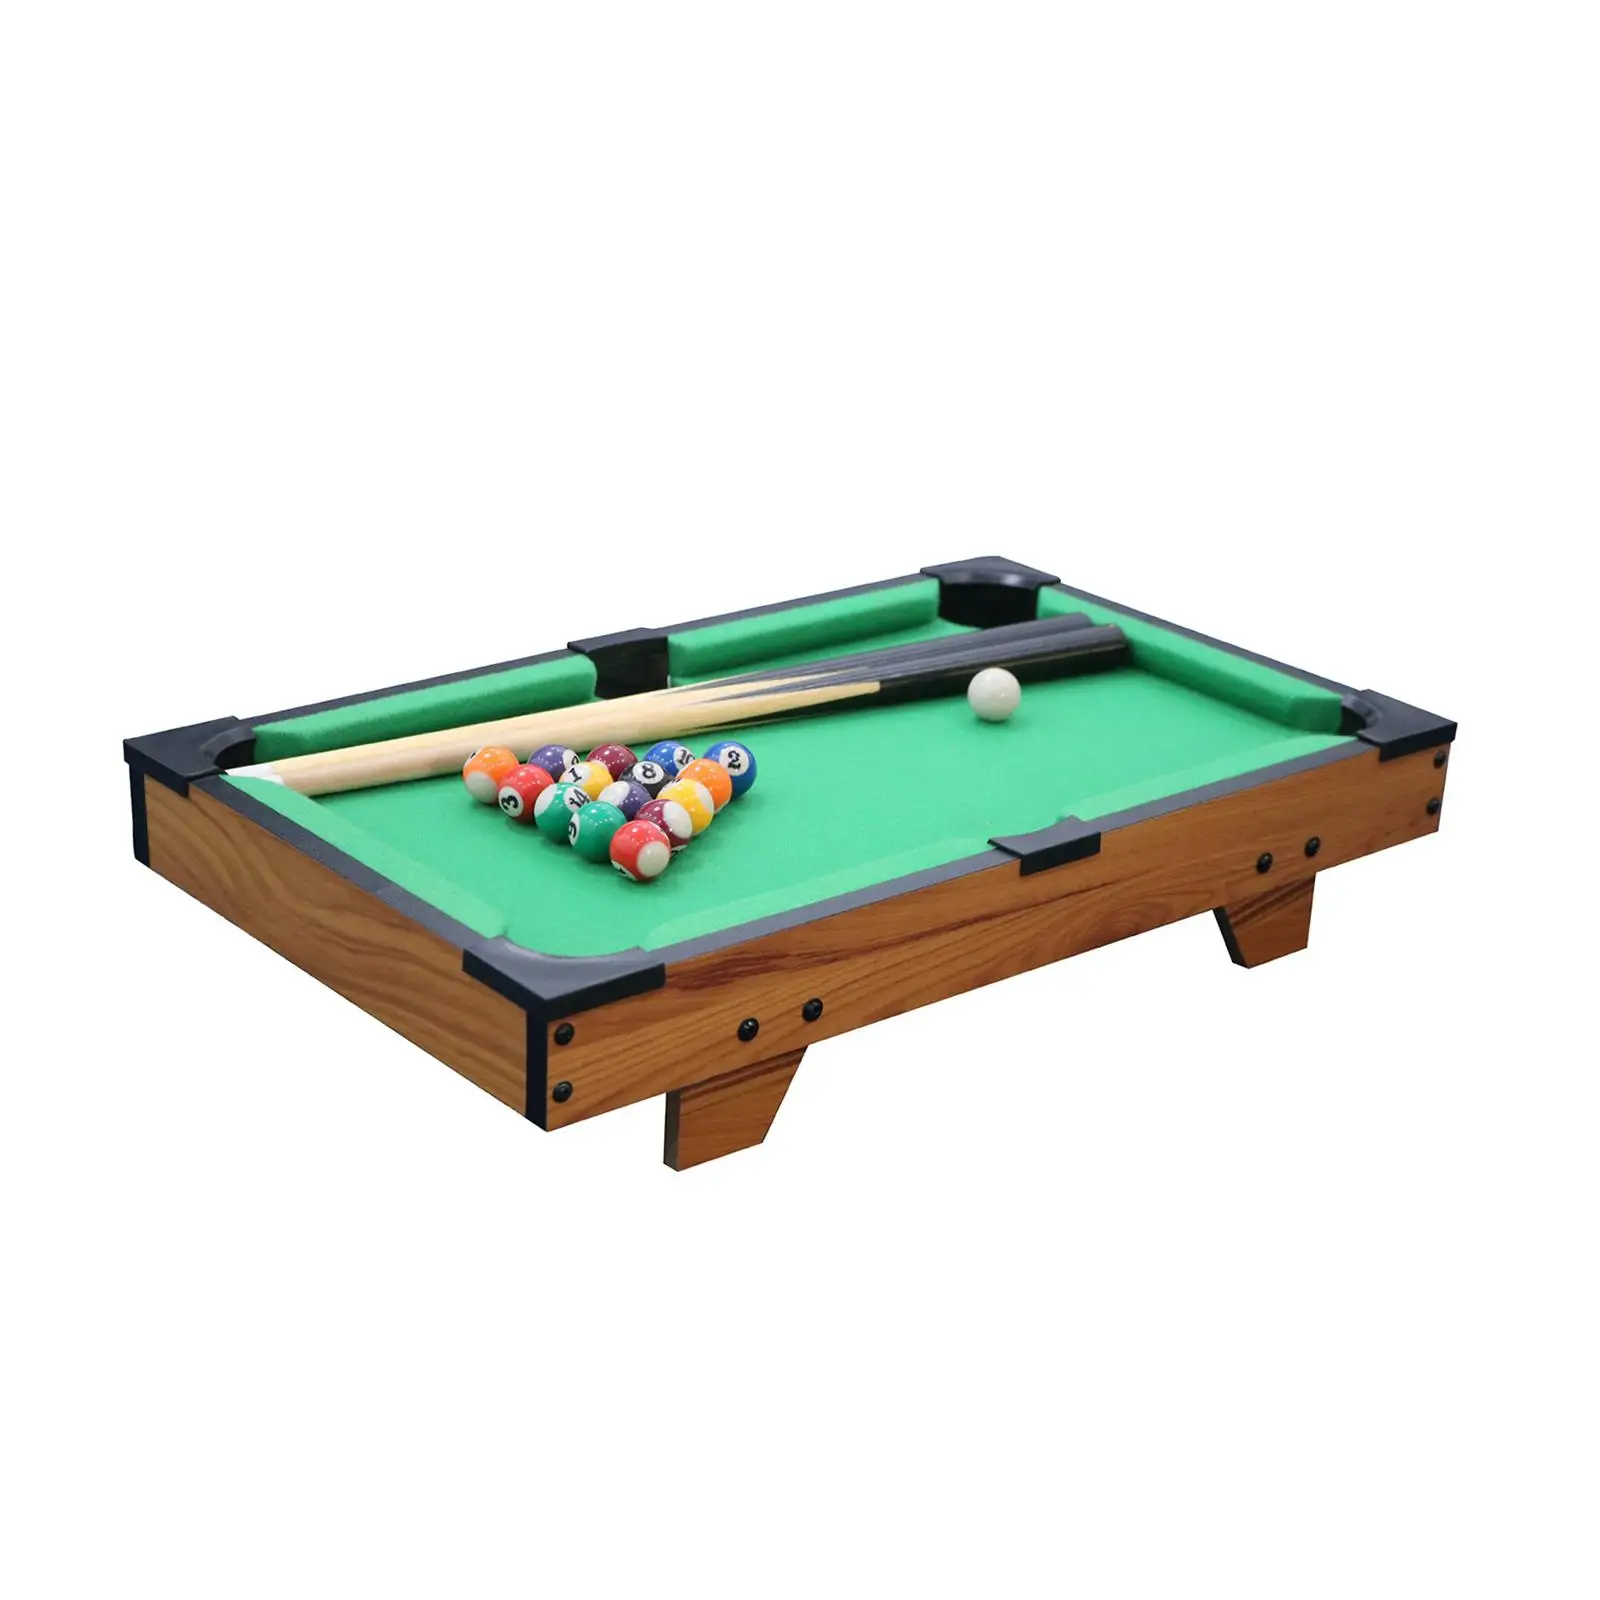 Portable Mini Table pool Game Set Balls Cues Interactive Snooker Billiards Toy for Family Dorm Entertainment Desktop Office